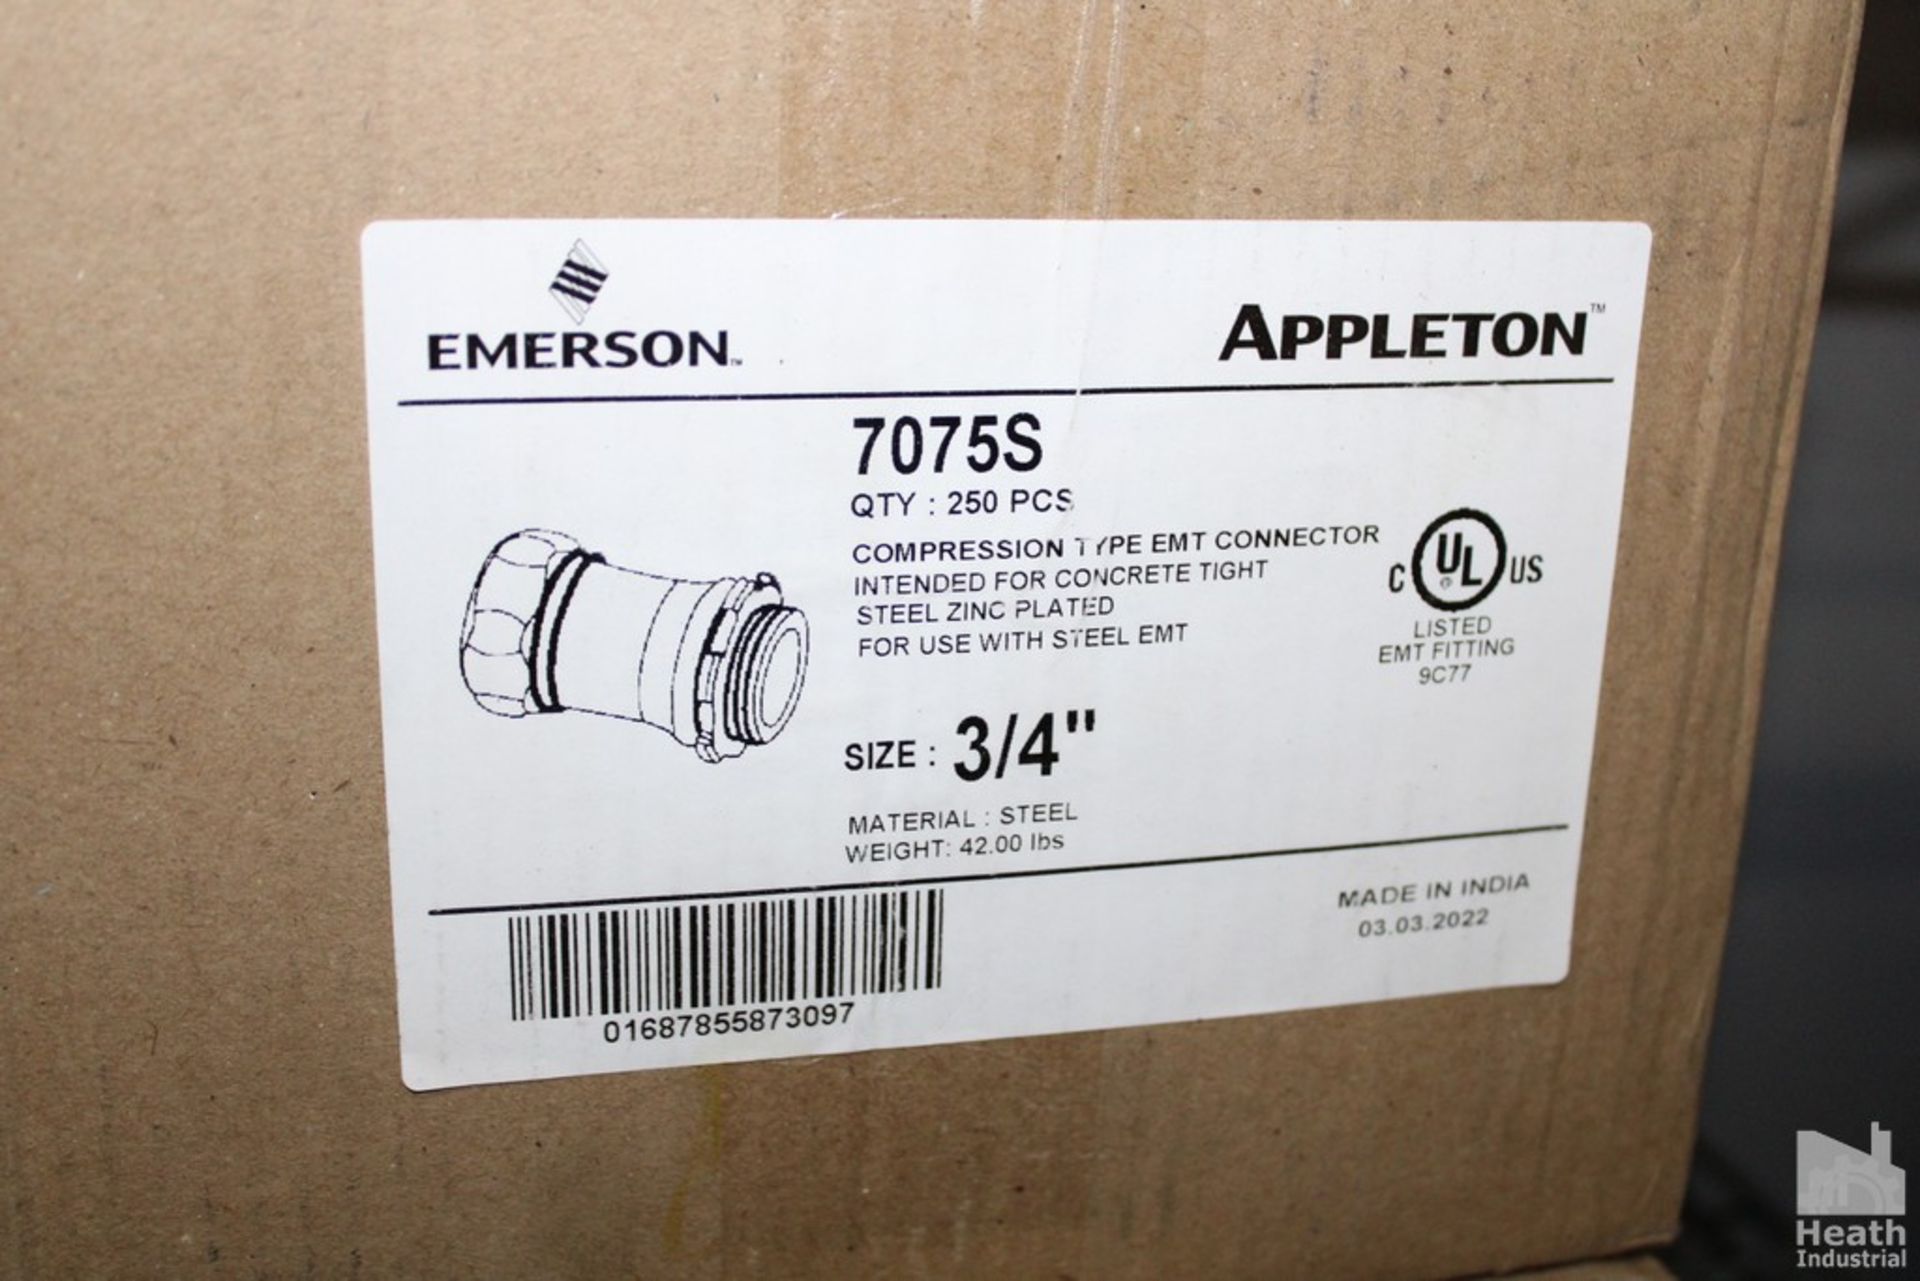 COMPRESSION COUPLINGS, 1/2" AND 3/4" IN TWO BOXES - Image 2 of 2